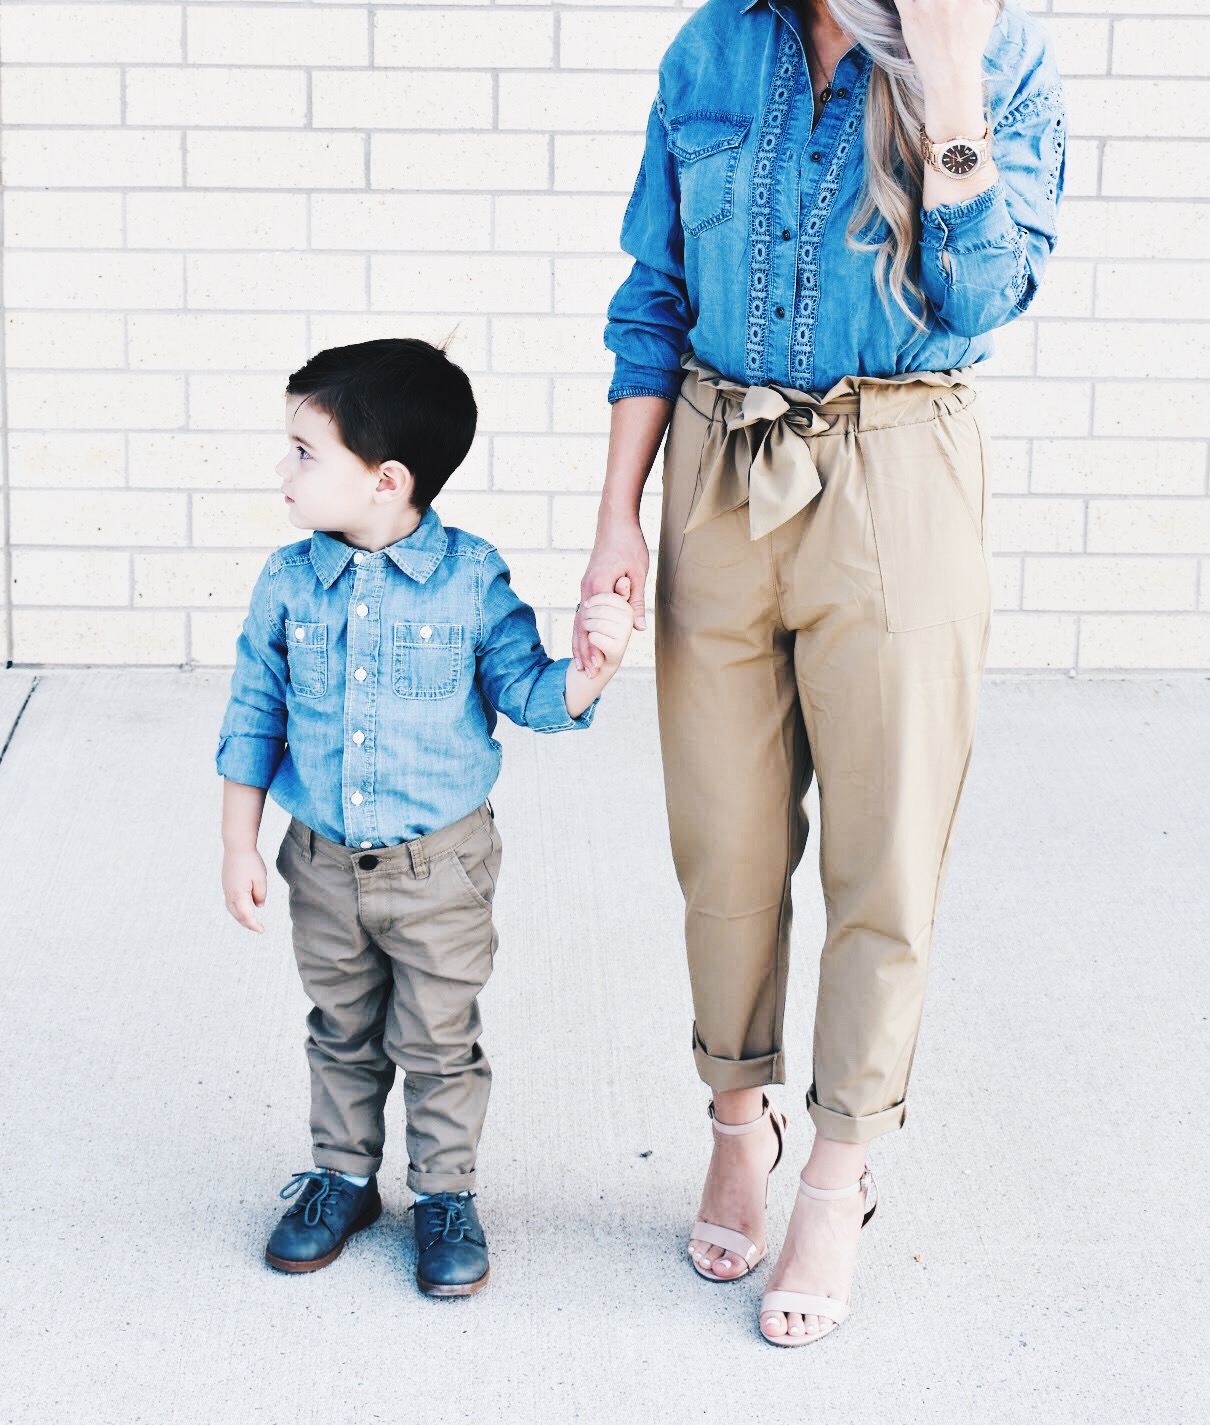 Mommy and Son Matching Outfit Ideas - Mommy and Me Outfits for Boys - Mommy and Me Son Outfits - Outfits for Mommy and Son - Chambray Shirt with Khakis is an outfit that can work for mommy and son! Fashion blogger COVET by tricia shows how to style a chambray shirt with khakis in a mommy and me outfit idea for boy moms. #KidsFashion #MommyandMe #Twinning #BoyMom